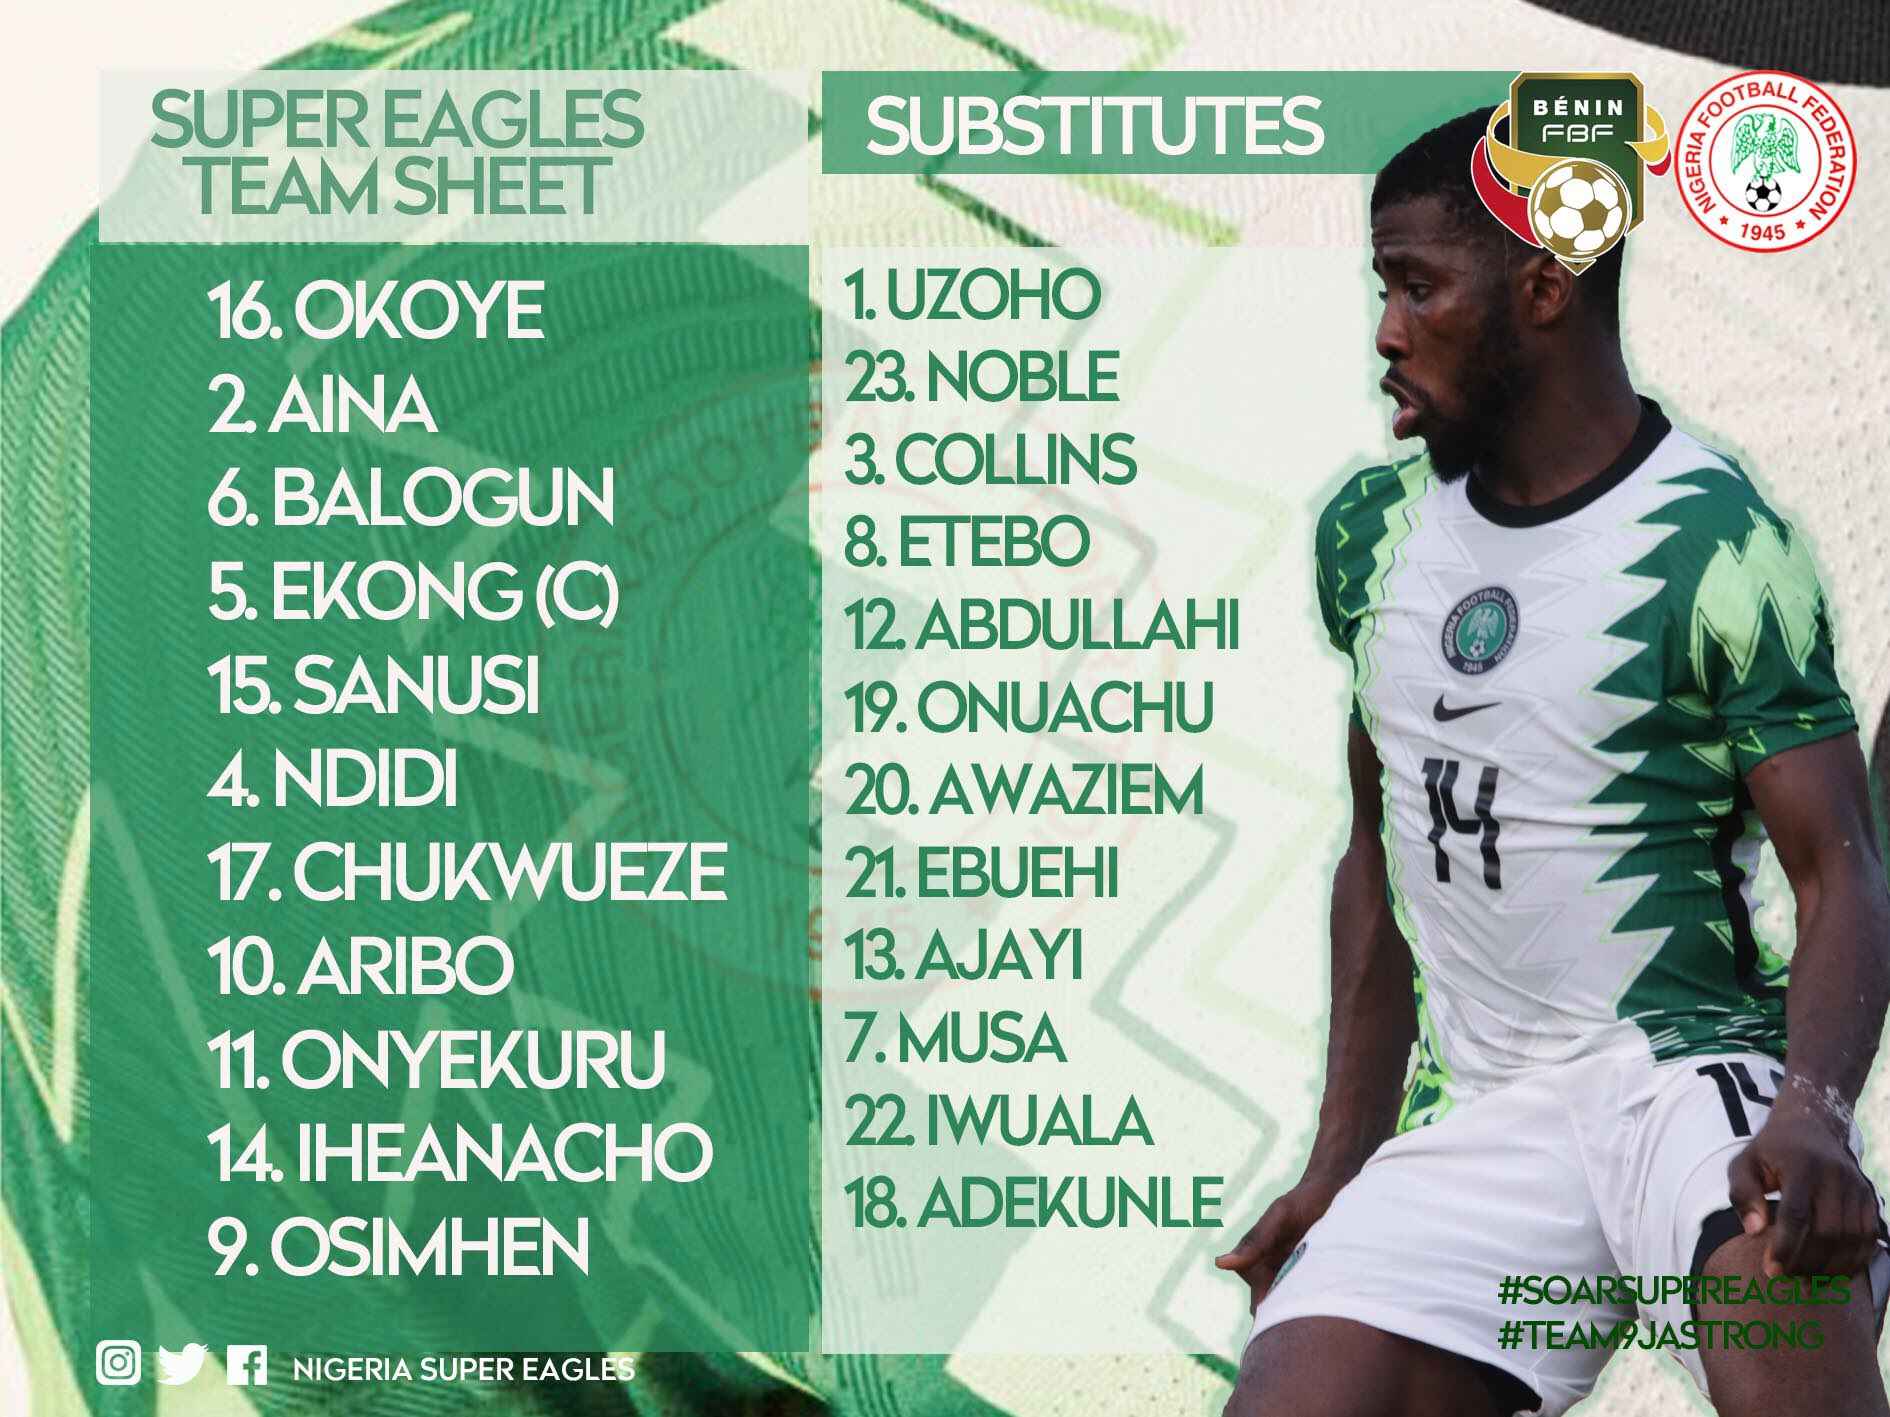 Everton's Alex Iwobi Out Of Super Eagles Squad After Testing Positive For COVID-19 - Tatahfonewsarena